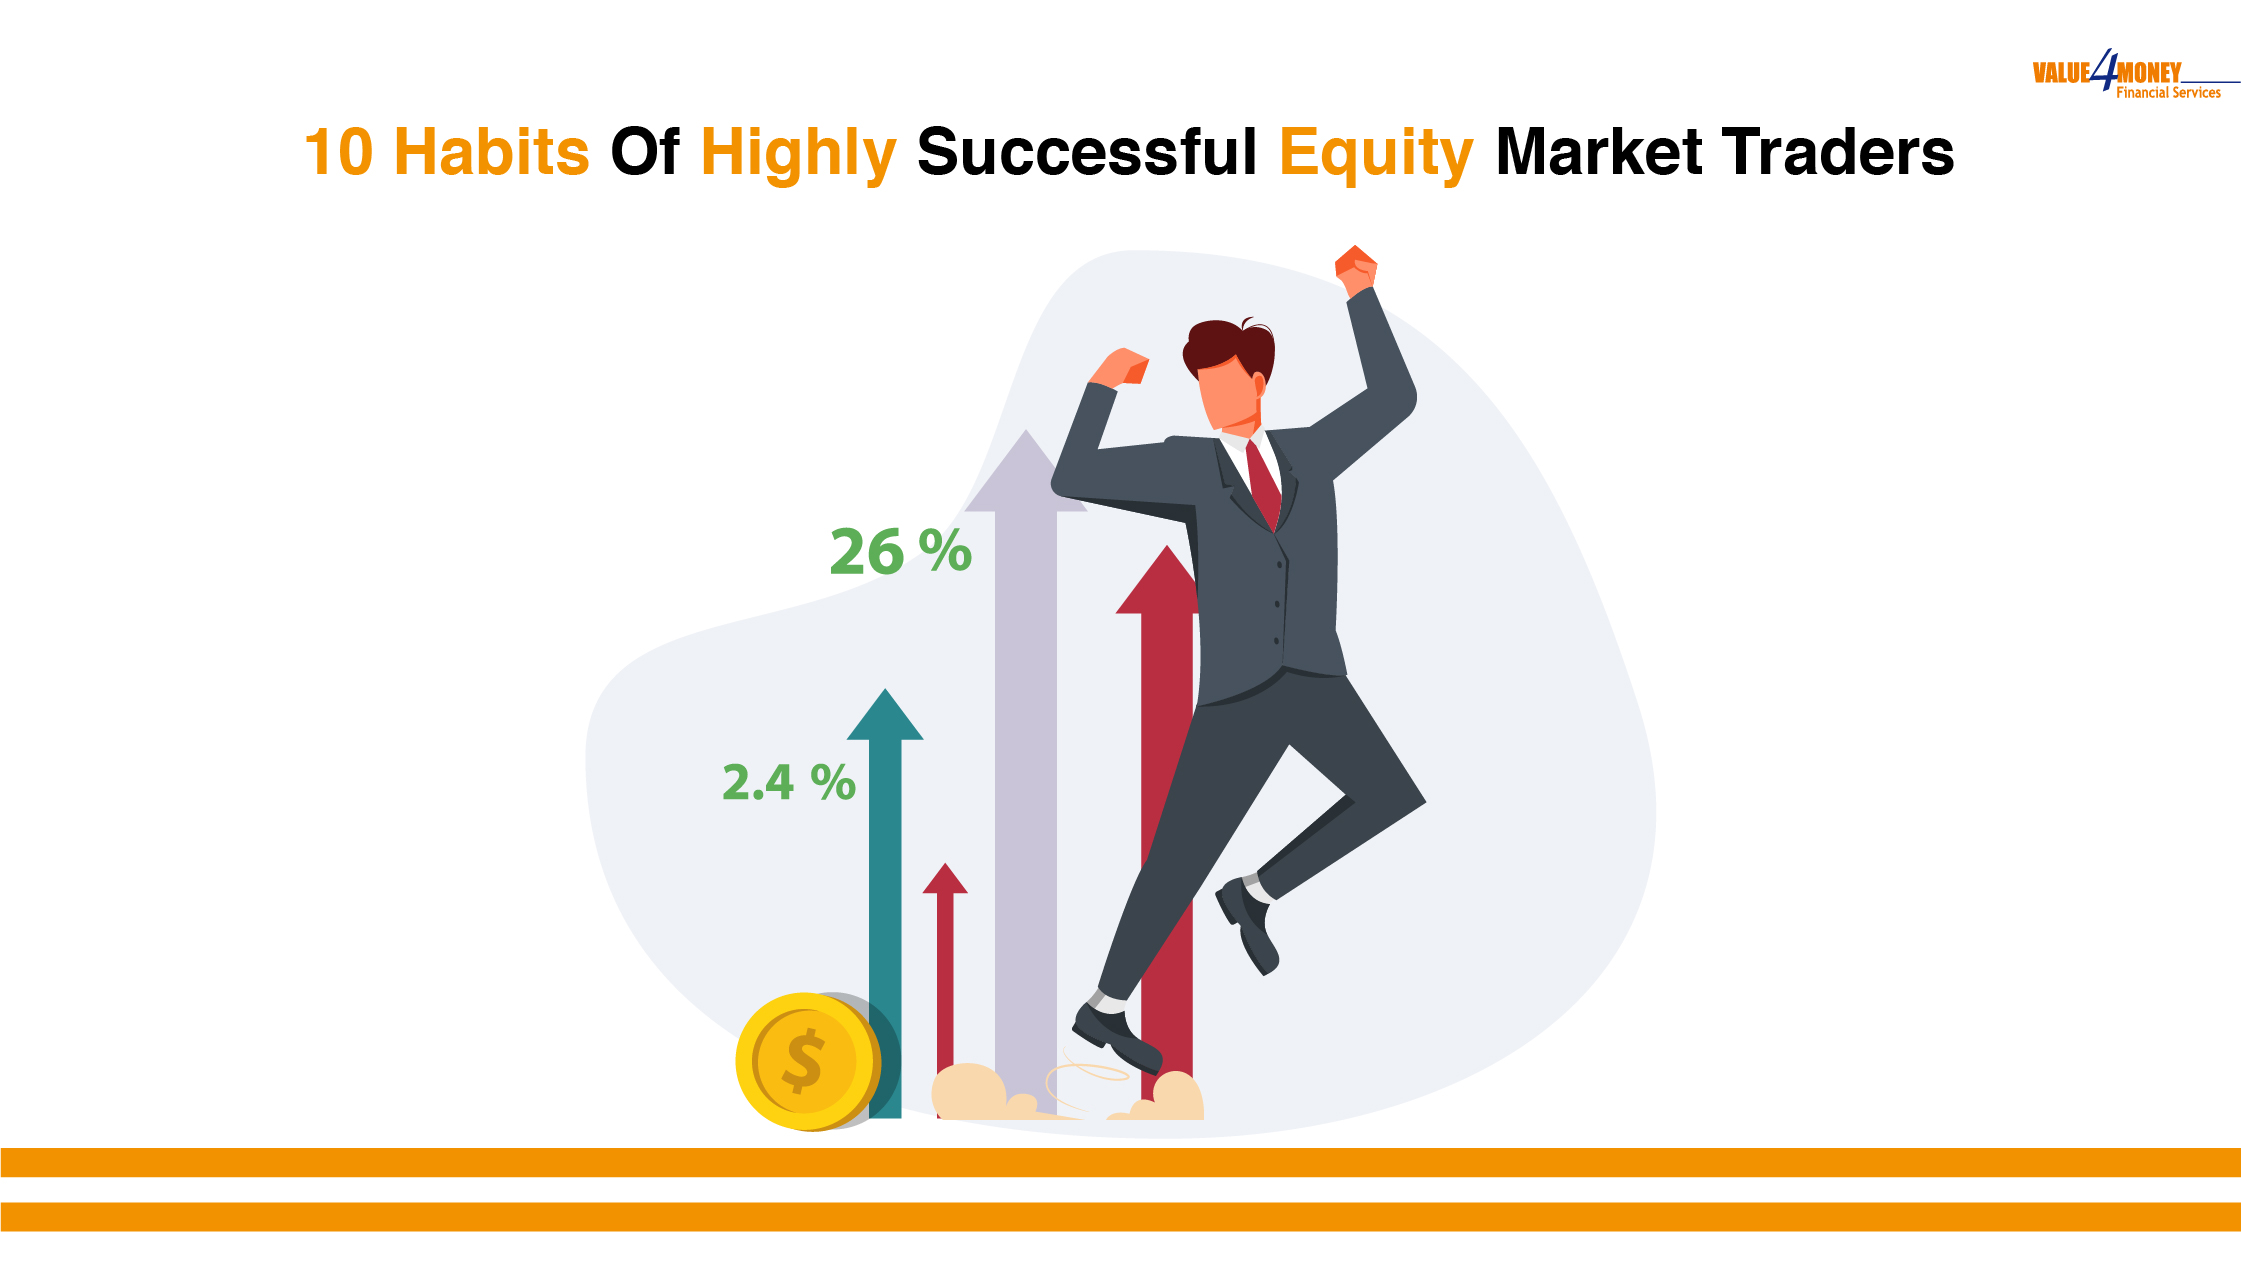 Habits of Highly Successful Equity Market Traders